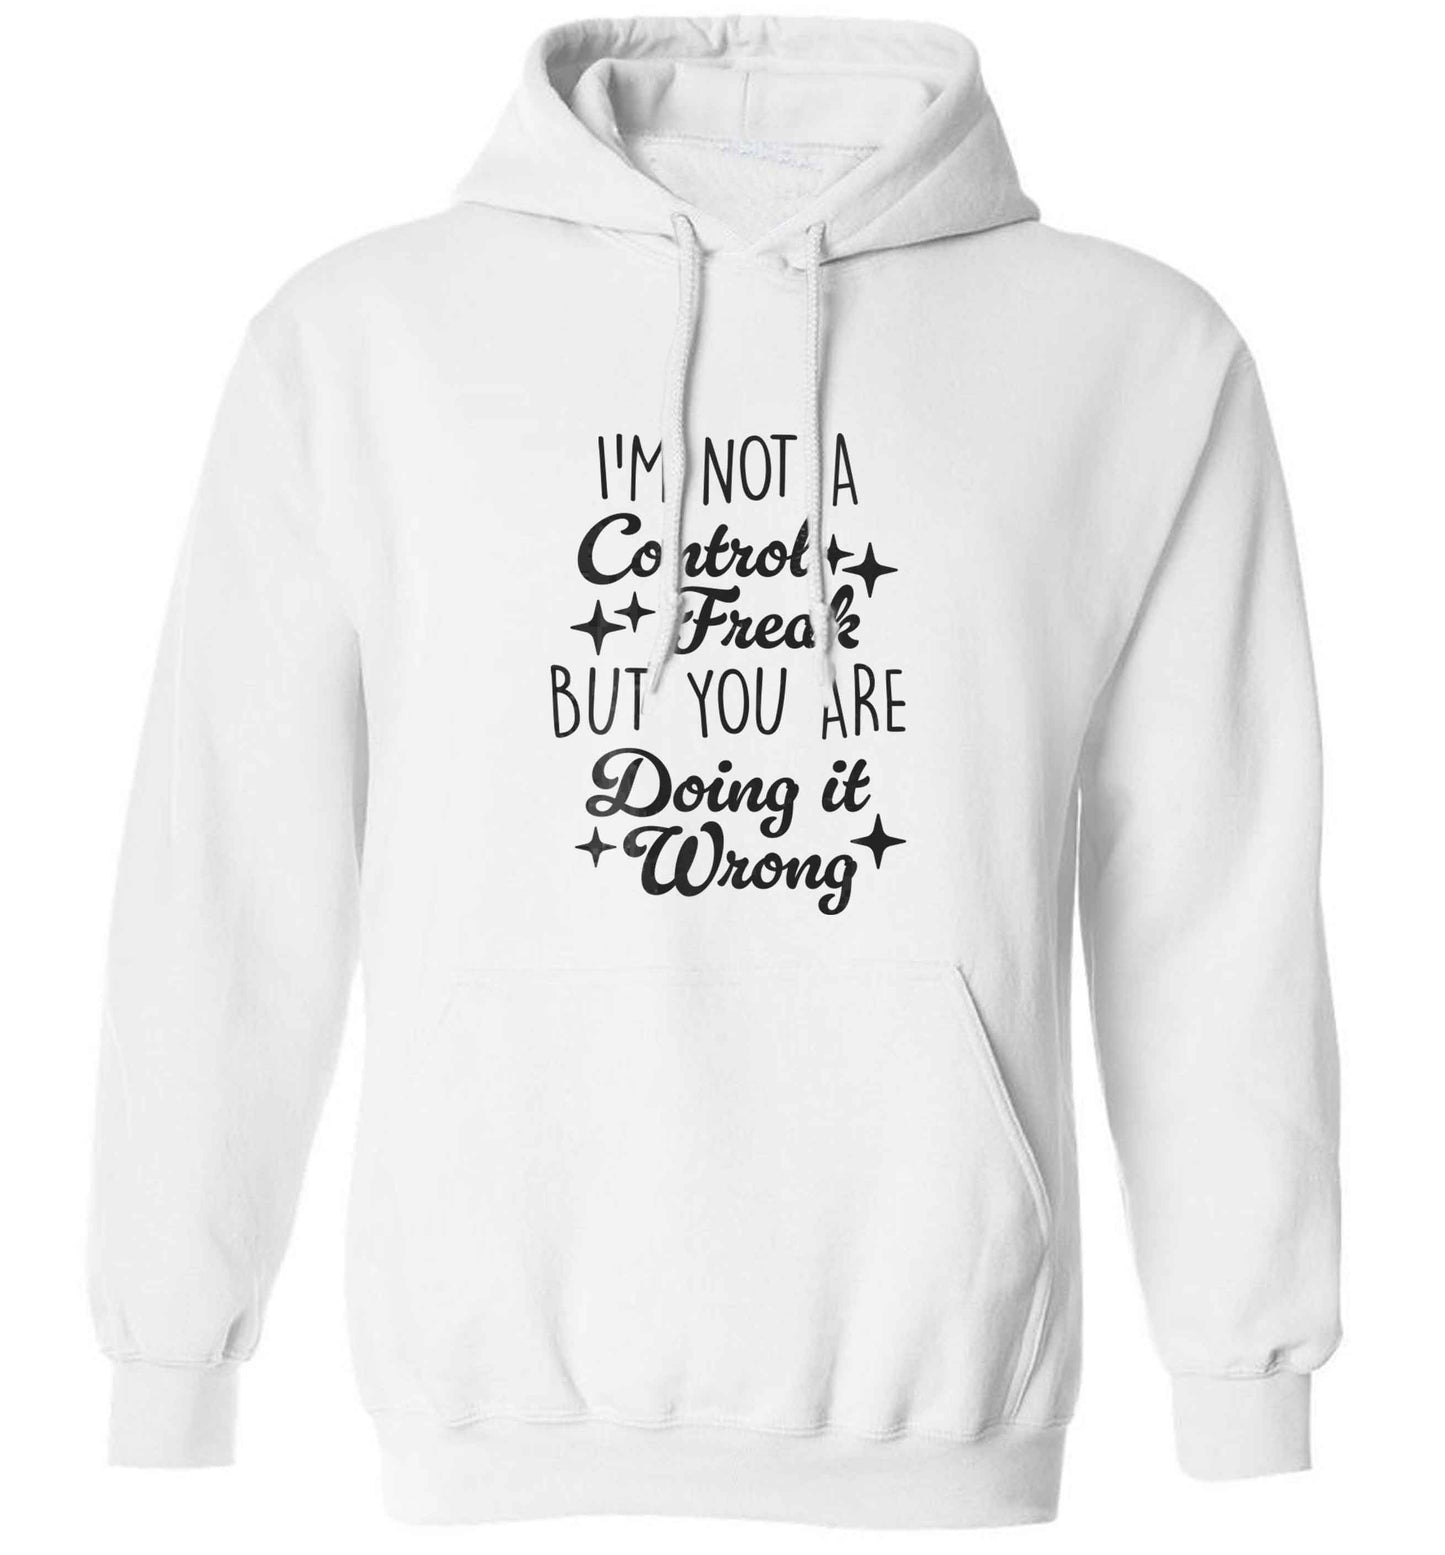 I'm not a control freak but you are doing it wrong adults unisex white hoodie 2XL